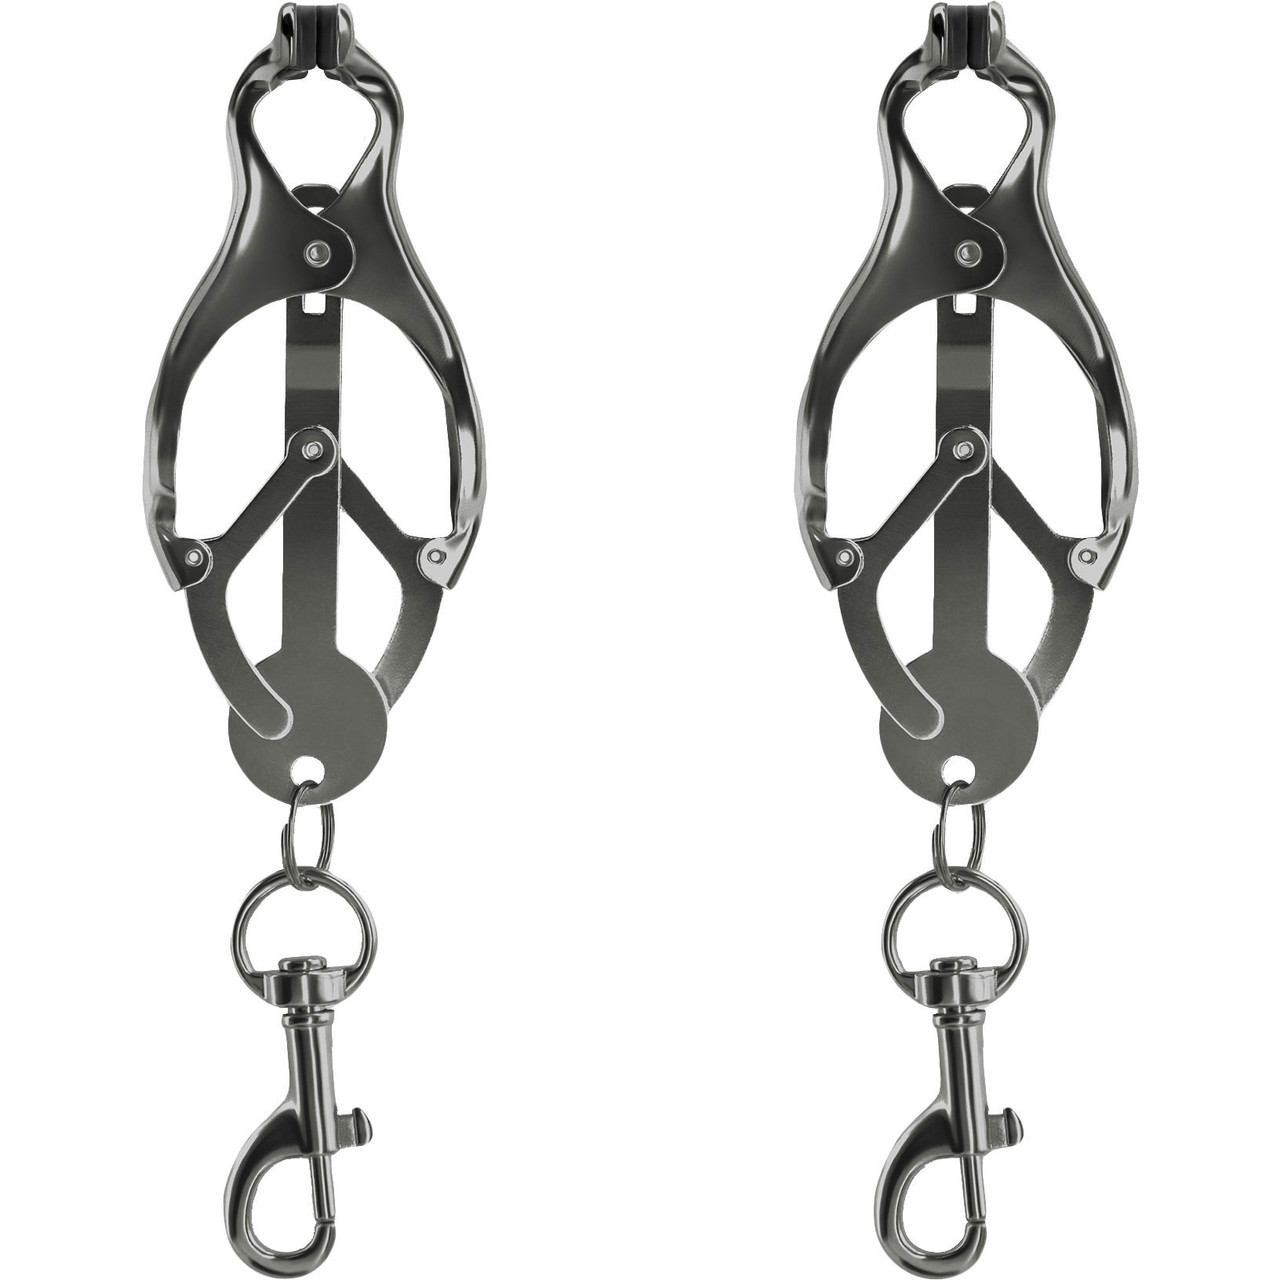 Bound C3 Butterfly Clamps